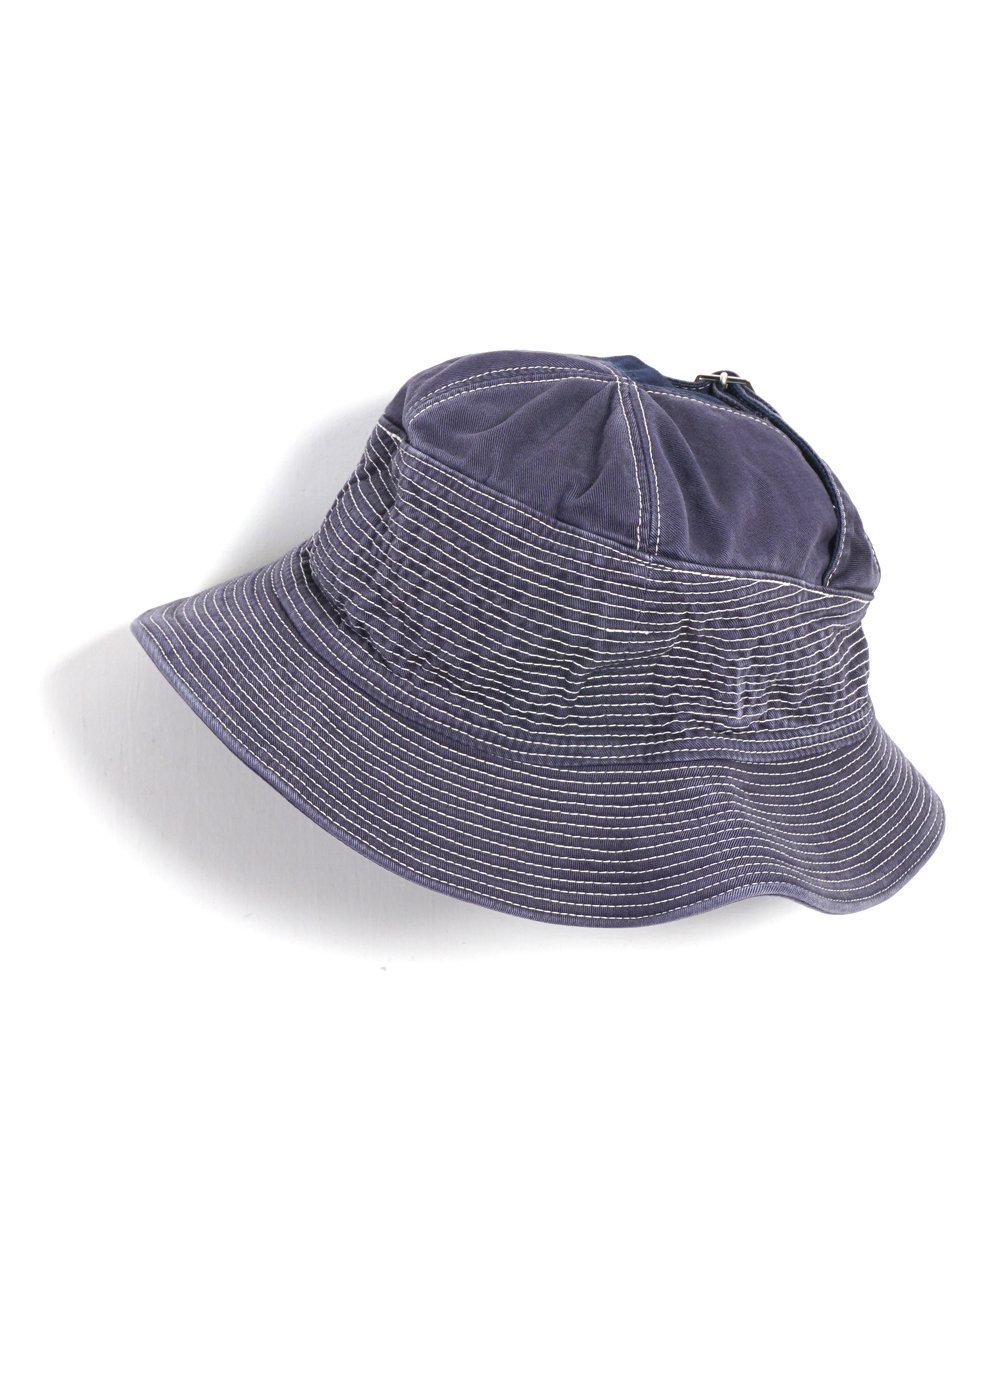 SOLD OUT - THE OLD MAN AND THE SEA | Chino Hat | Navy - HANSEN Garments